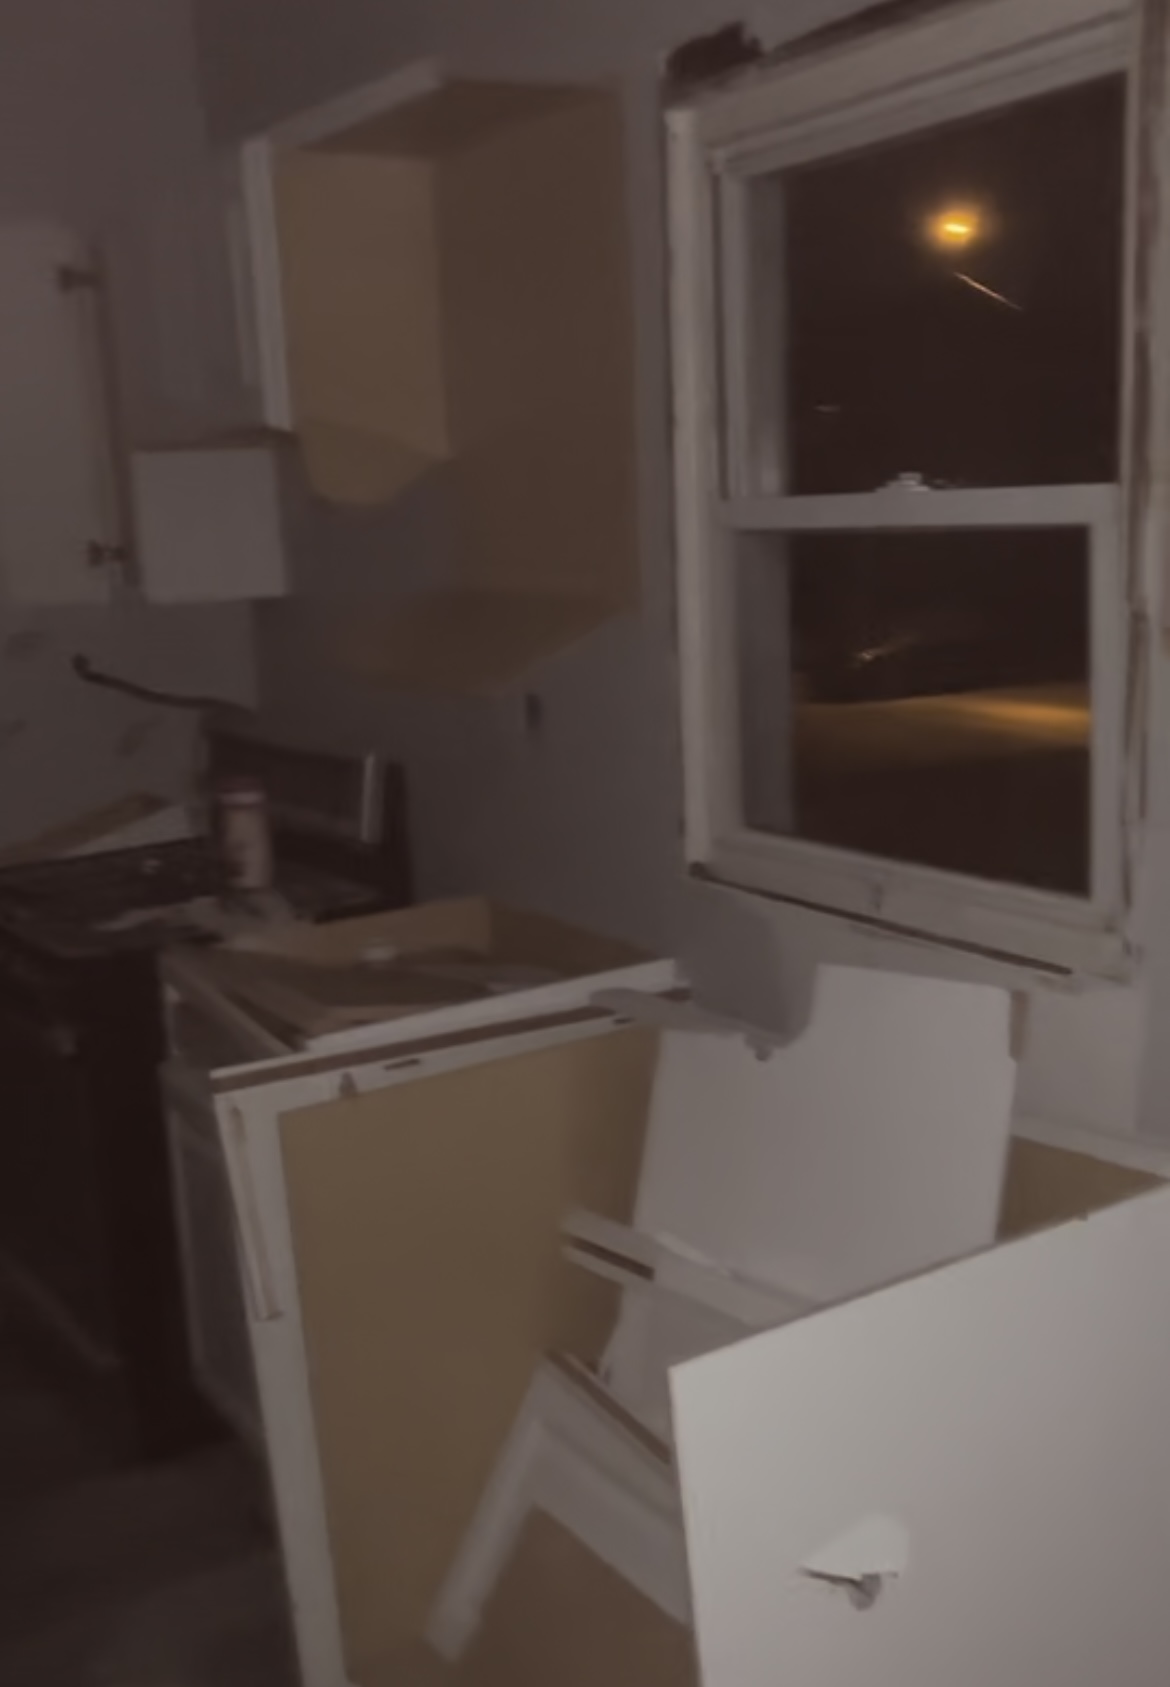 All brand new cabinets destroyed 